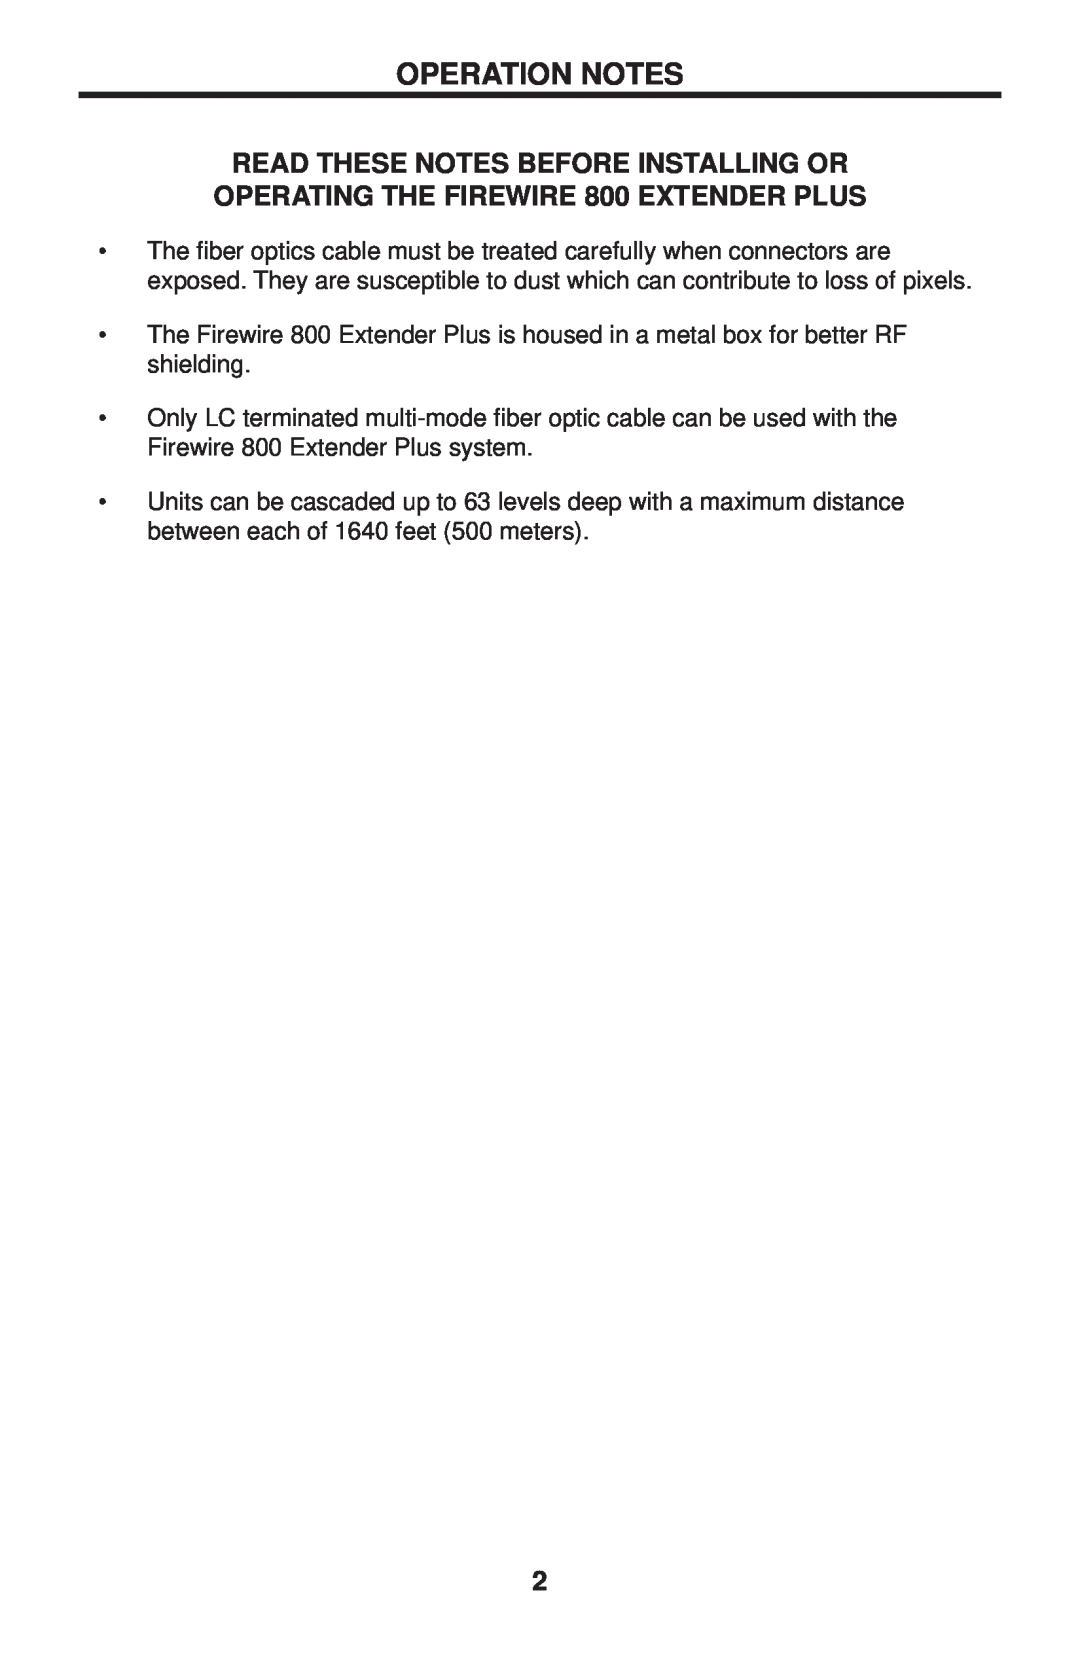 Gefen EXT-FW-1394BP Operation Notes, Read These Notes Before Installing Or, OPERATING THE FIREWIRE 800 EXTENDER PLUS 